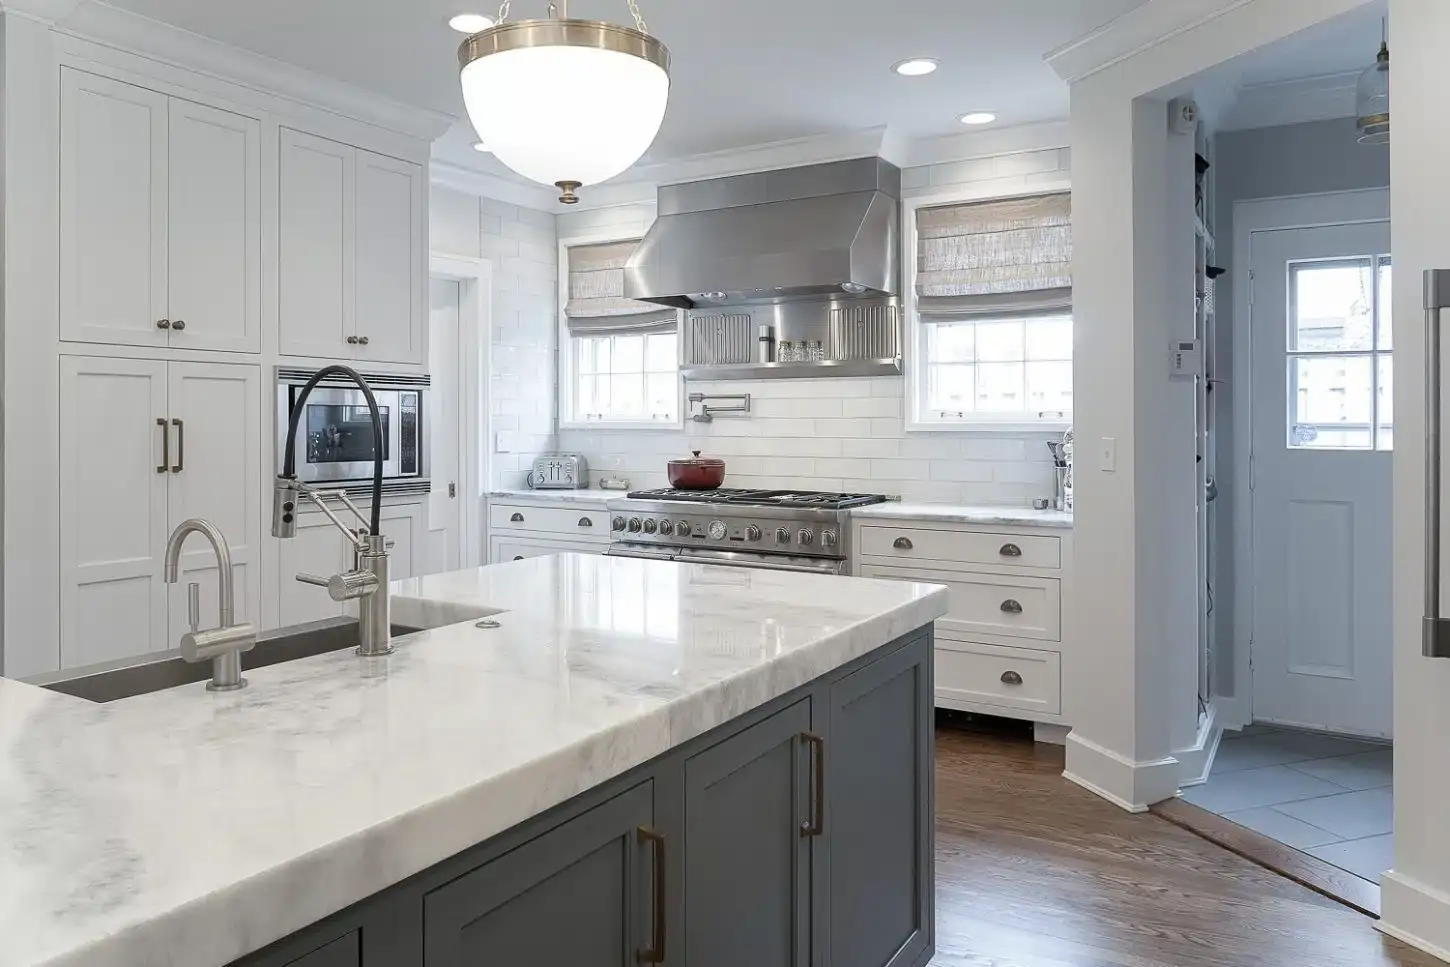 Chagrin-River-Company-Kitchen-Remodel-Stainless-Steel-Farm-Sink-Shaker-Heights-Ohio